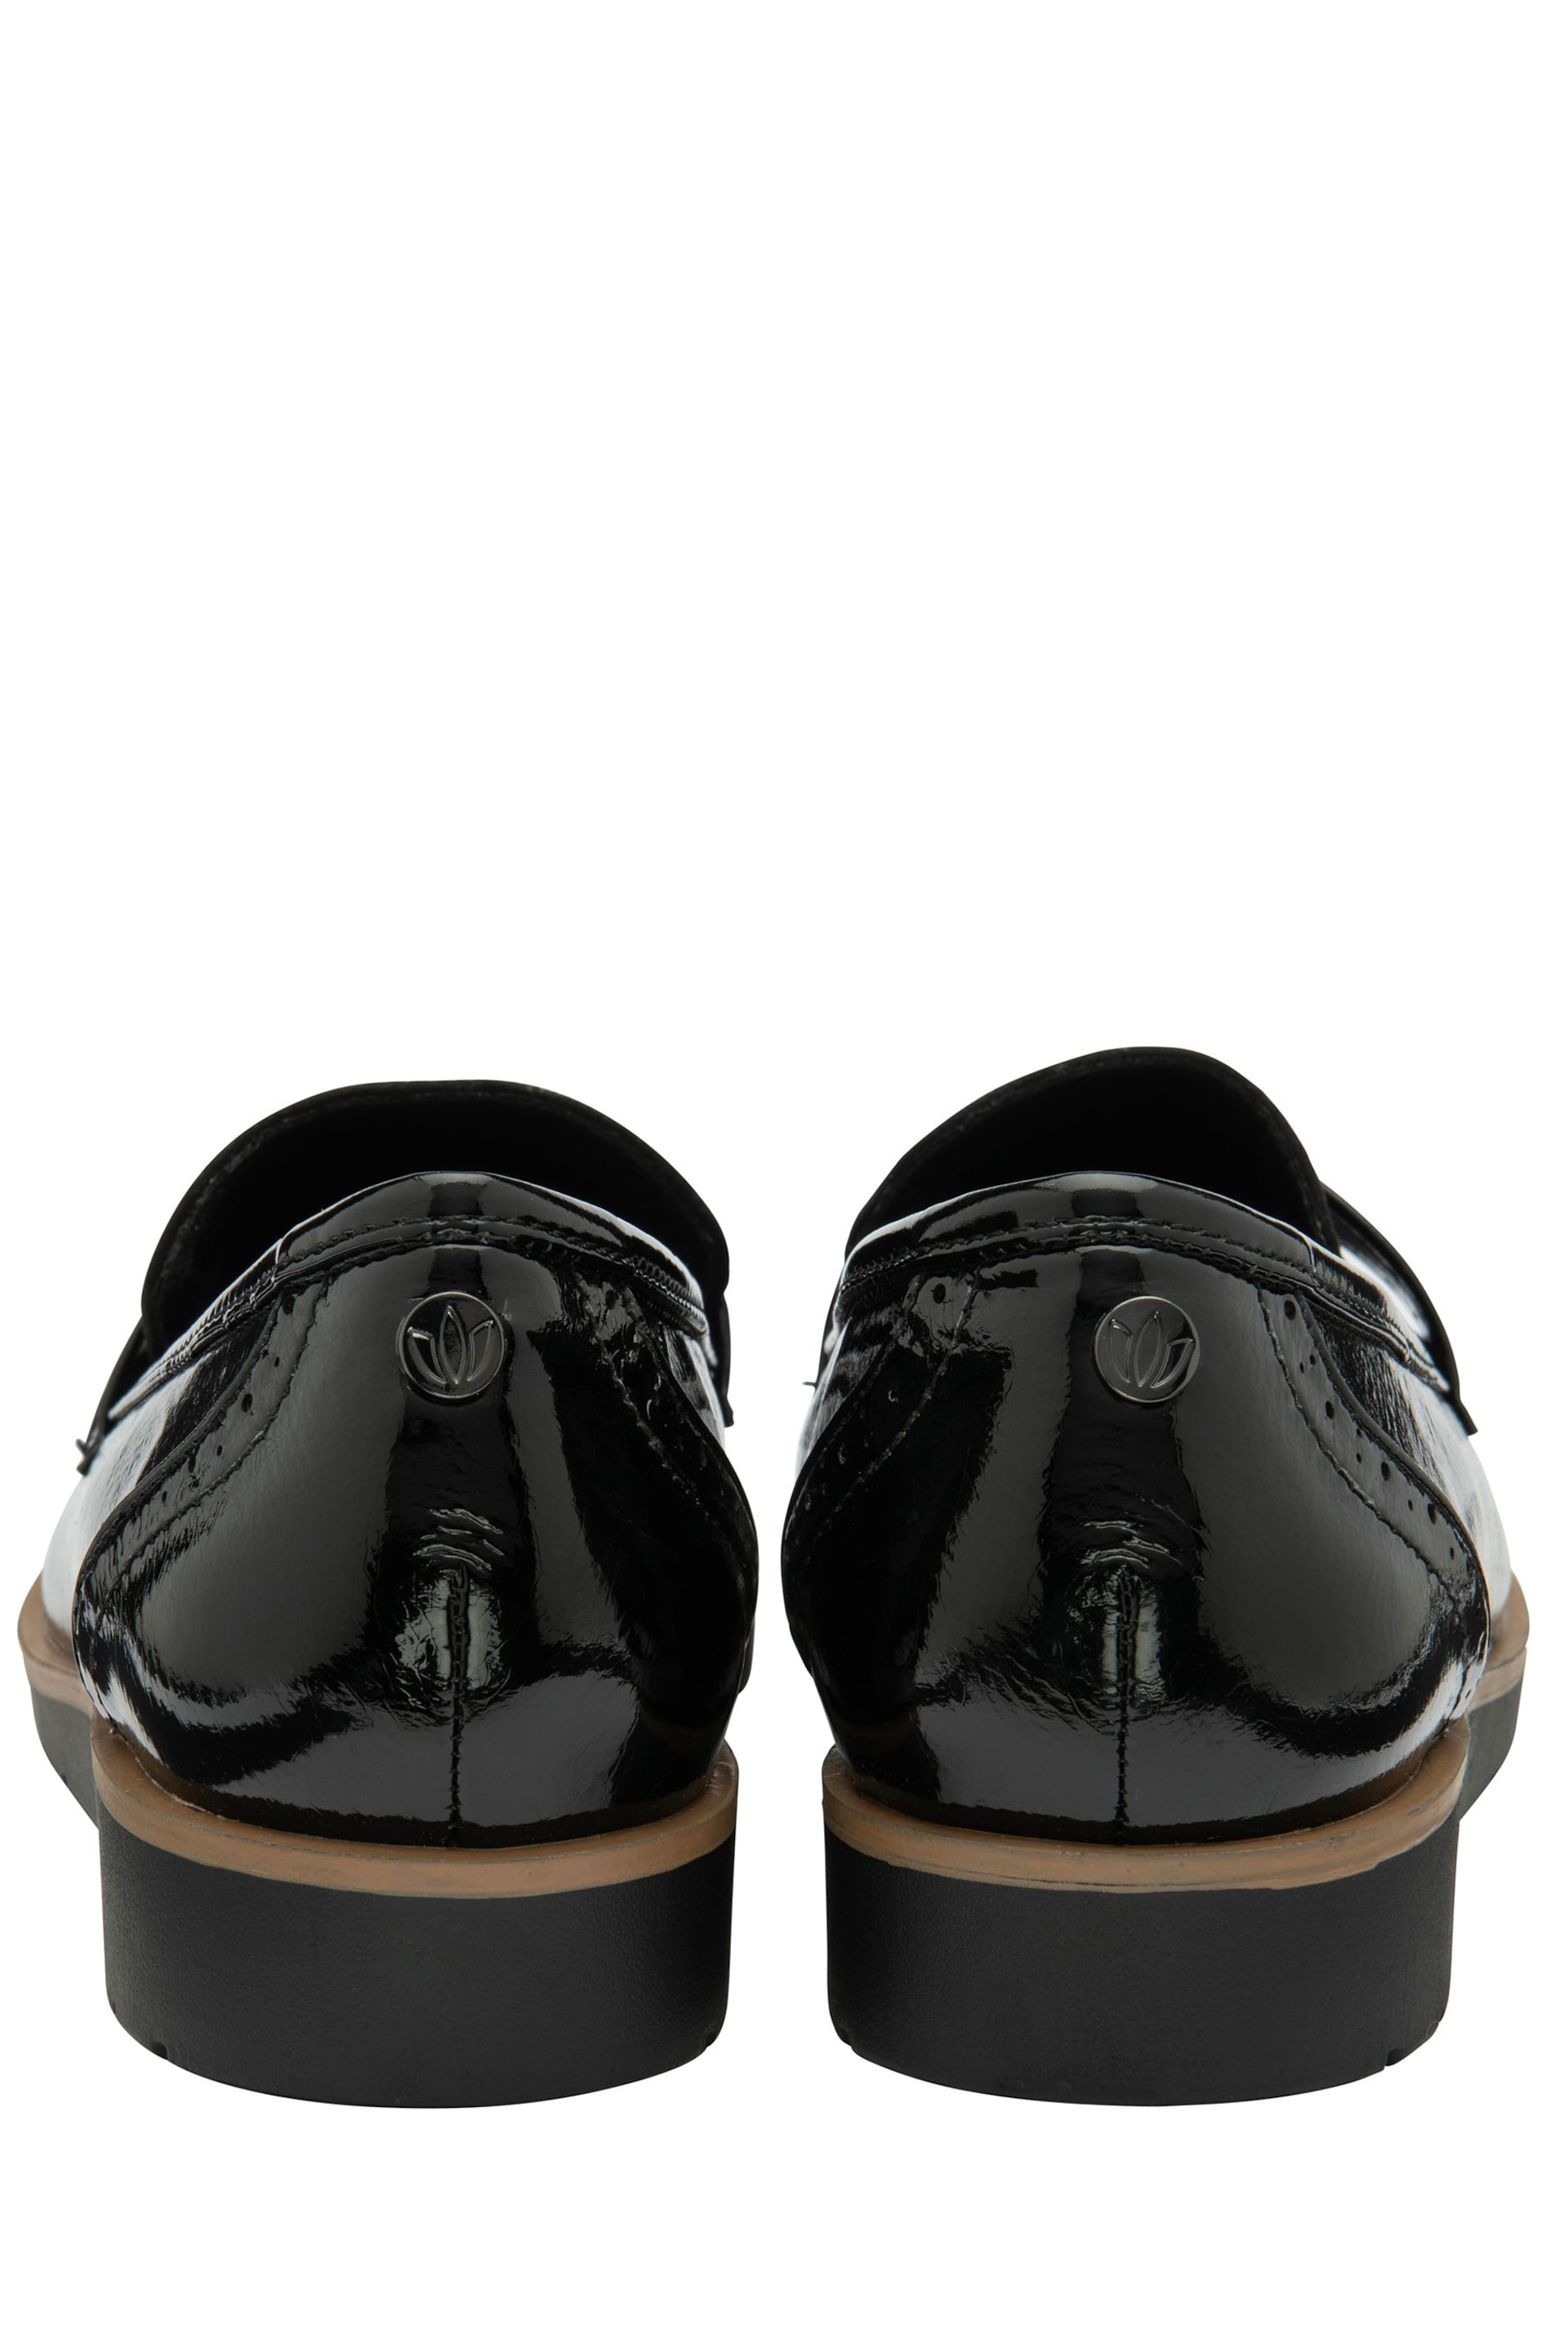 Lotus Black Patent Loafers - Image 3 of 4